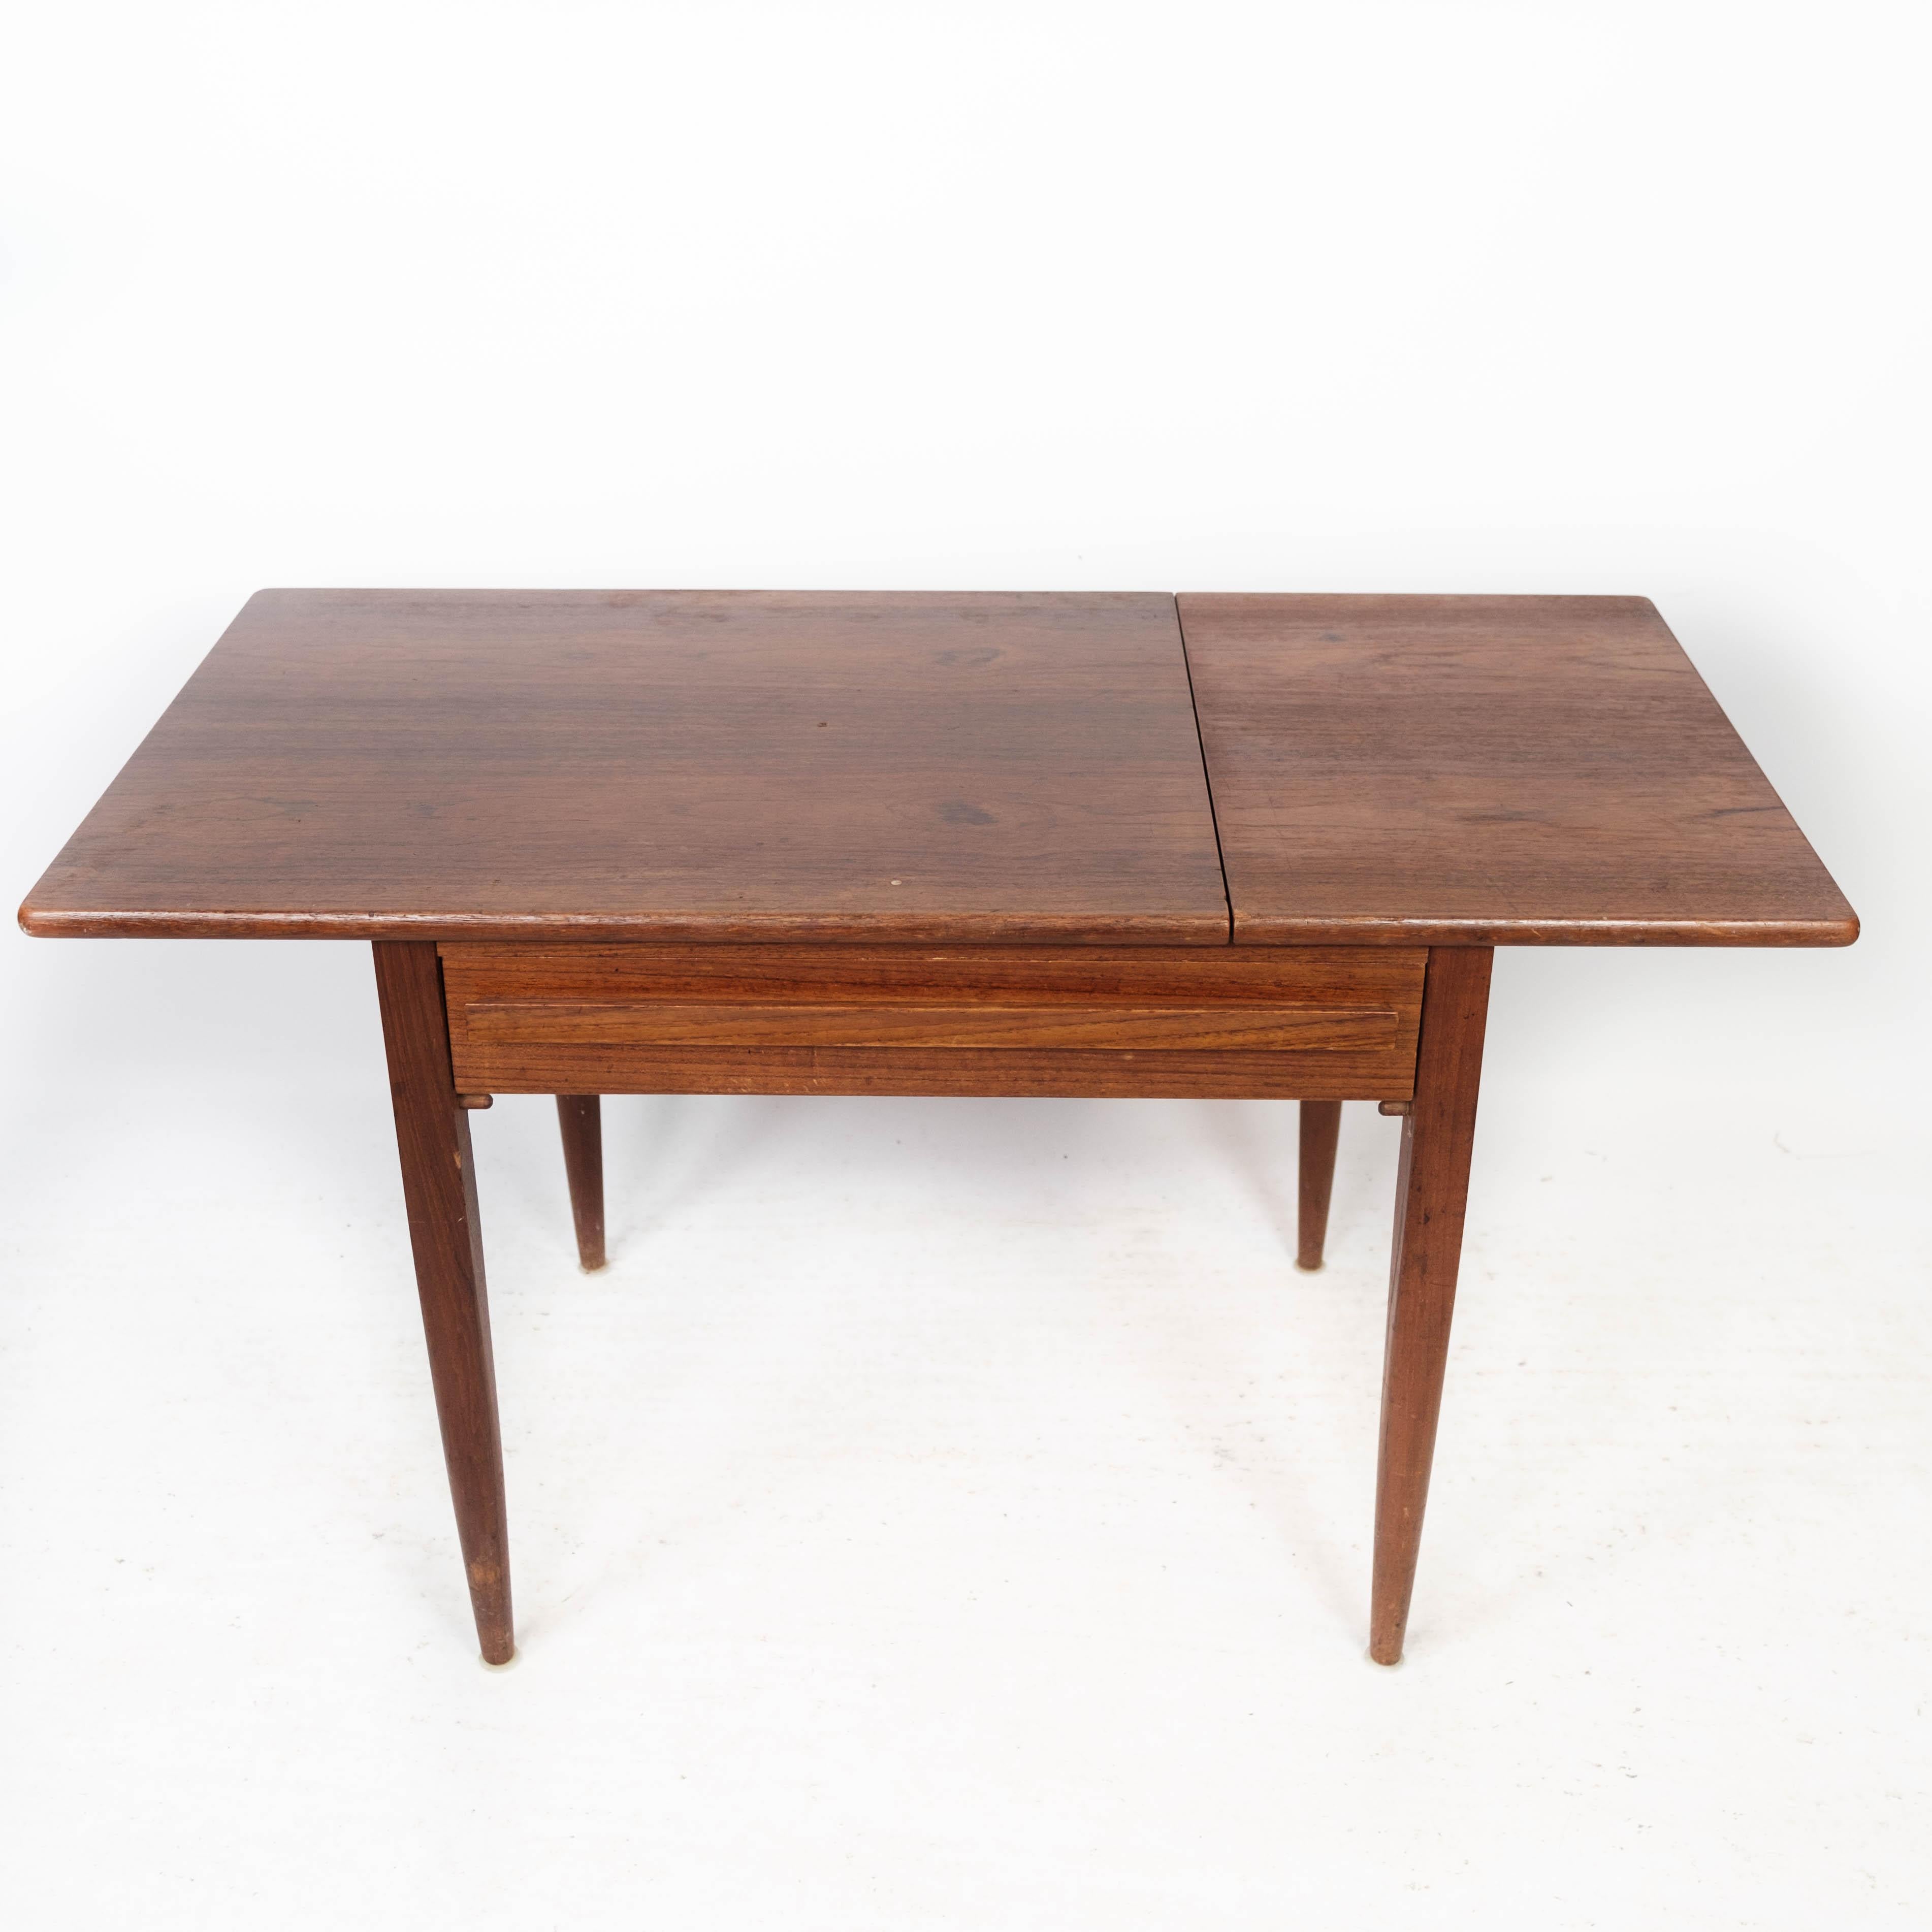 Side Table Made In Teak, Danish Design Made By Silkeborg Furniture From 1960s For Sale 6